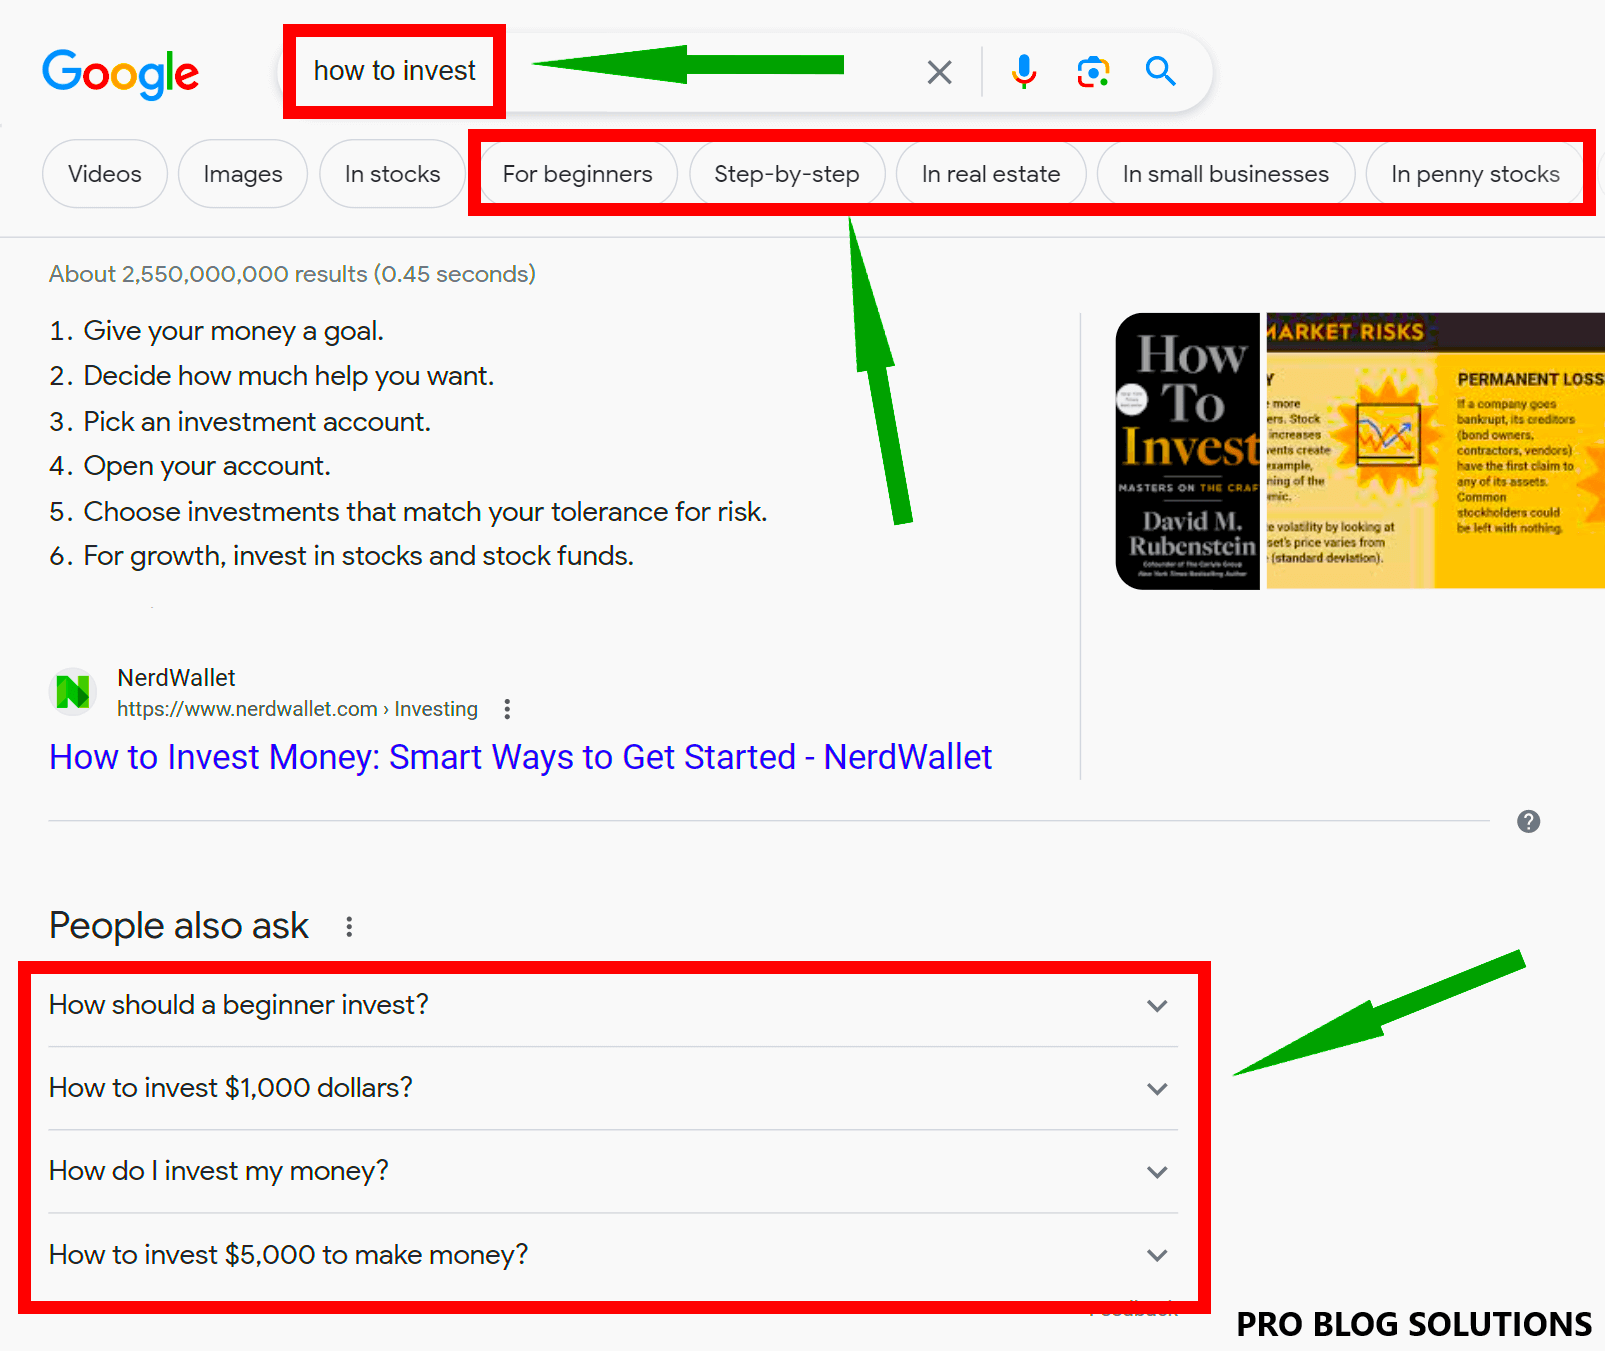 Search Results for 'how to invest'